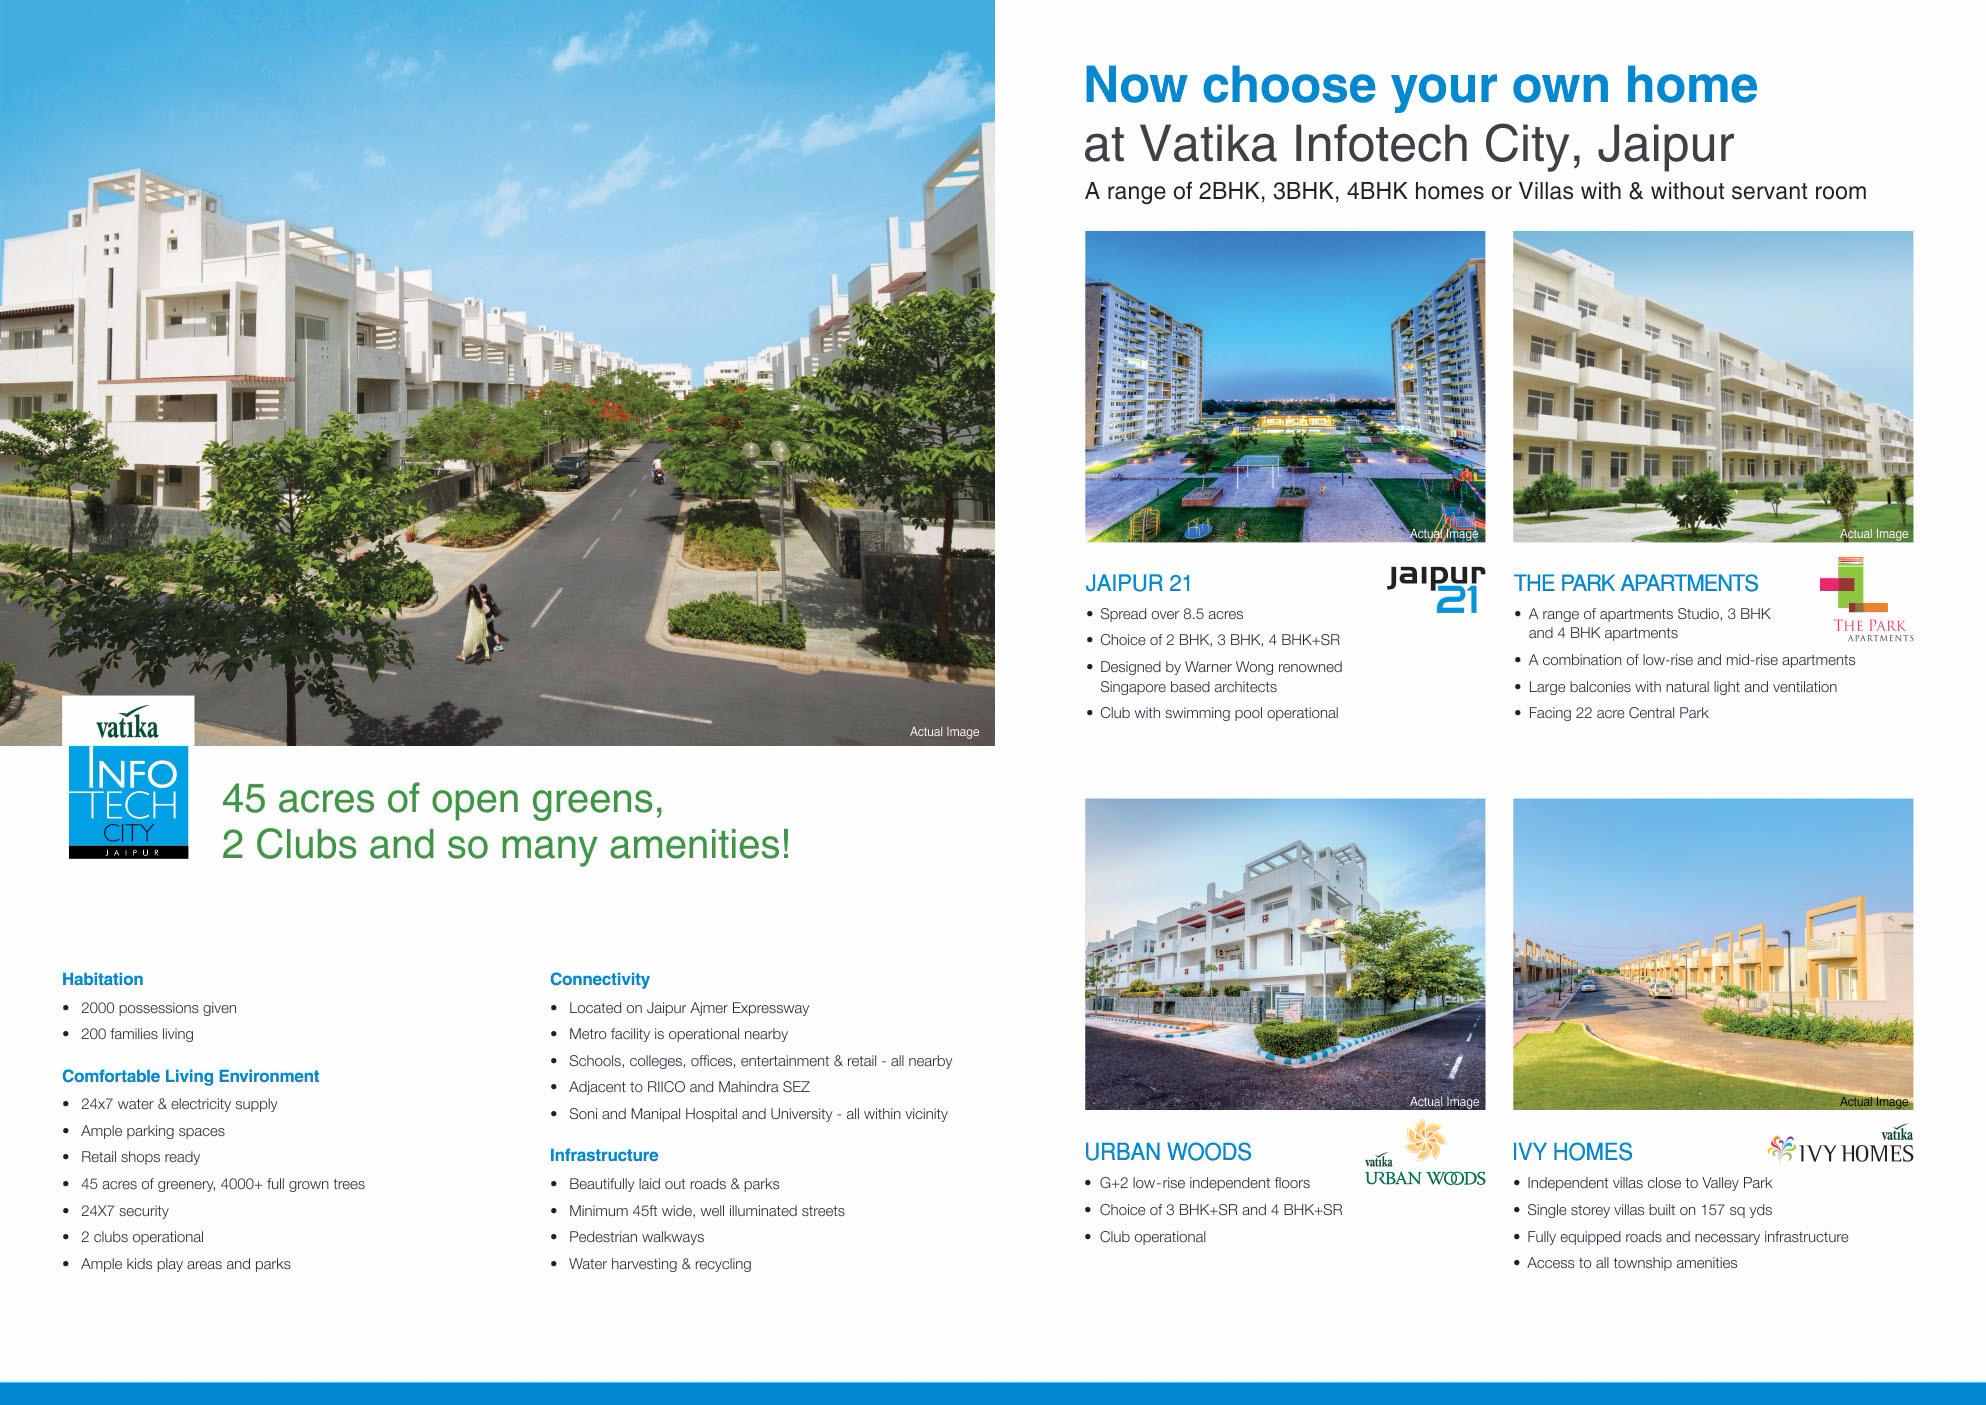 Now choose your own home at Vatika Infotech City in Jaipur Update